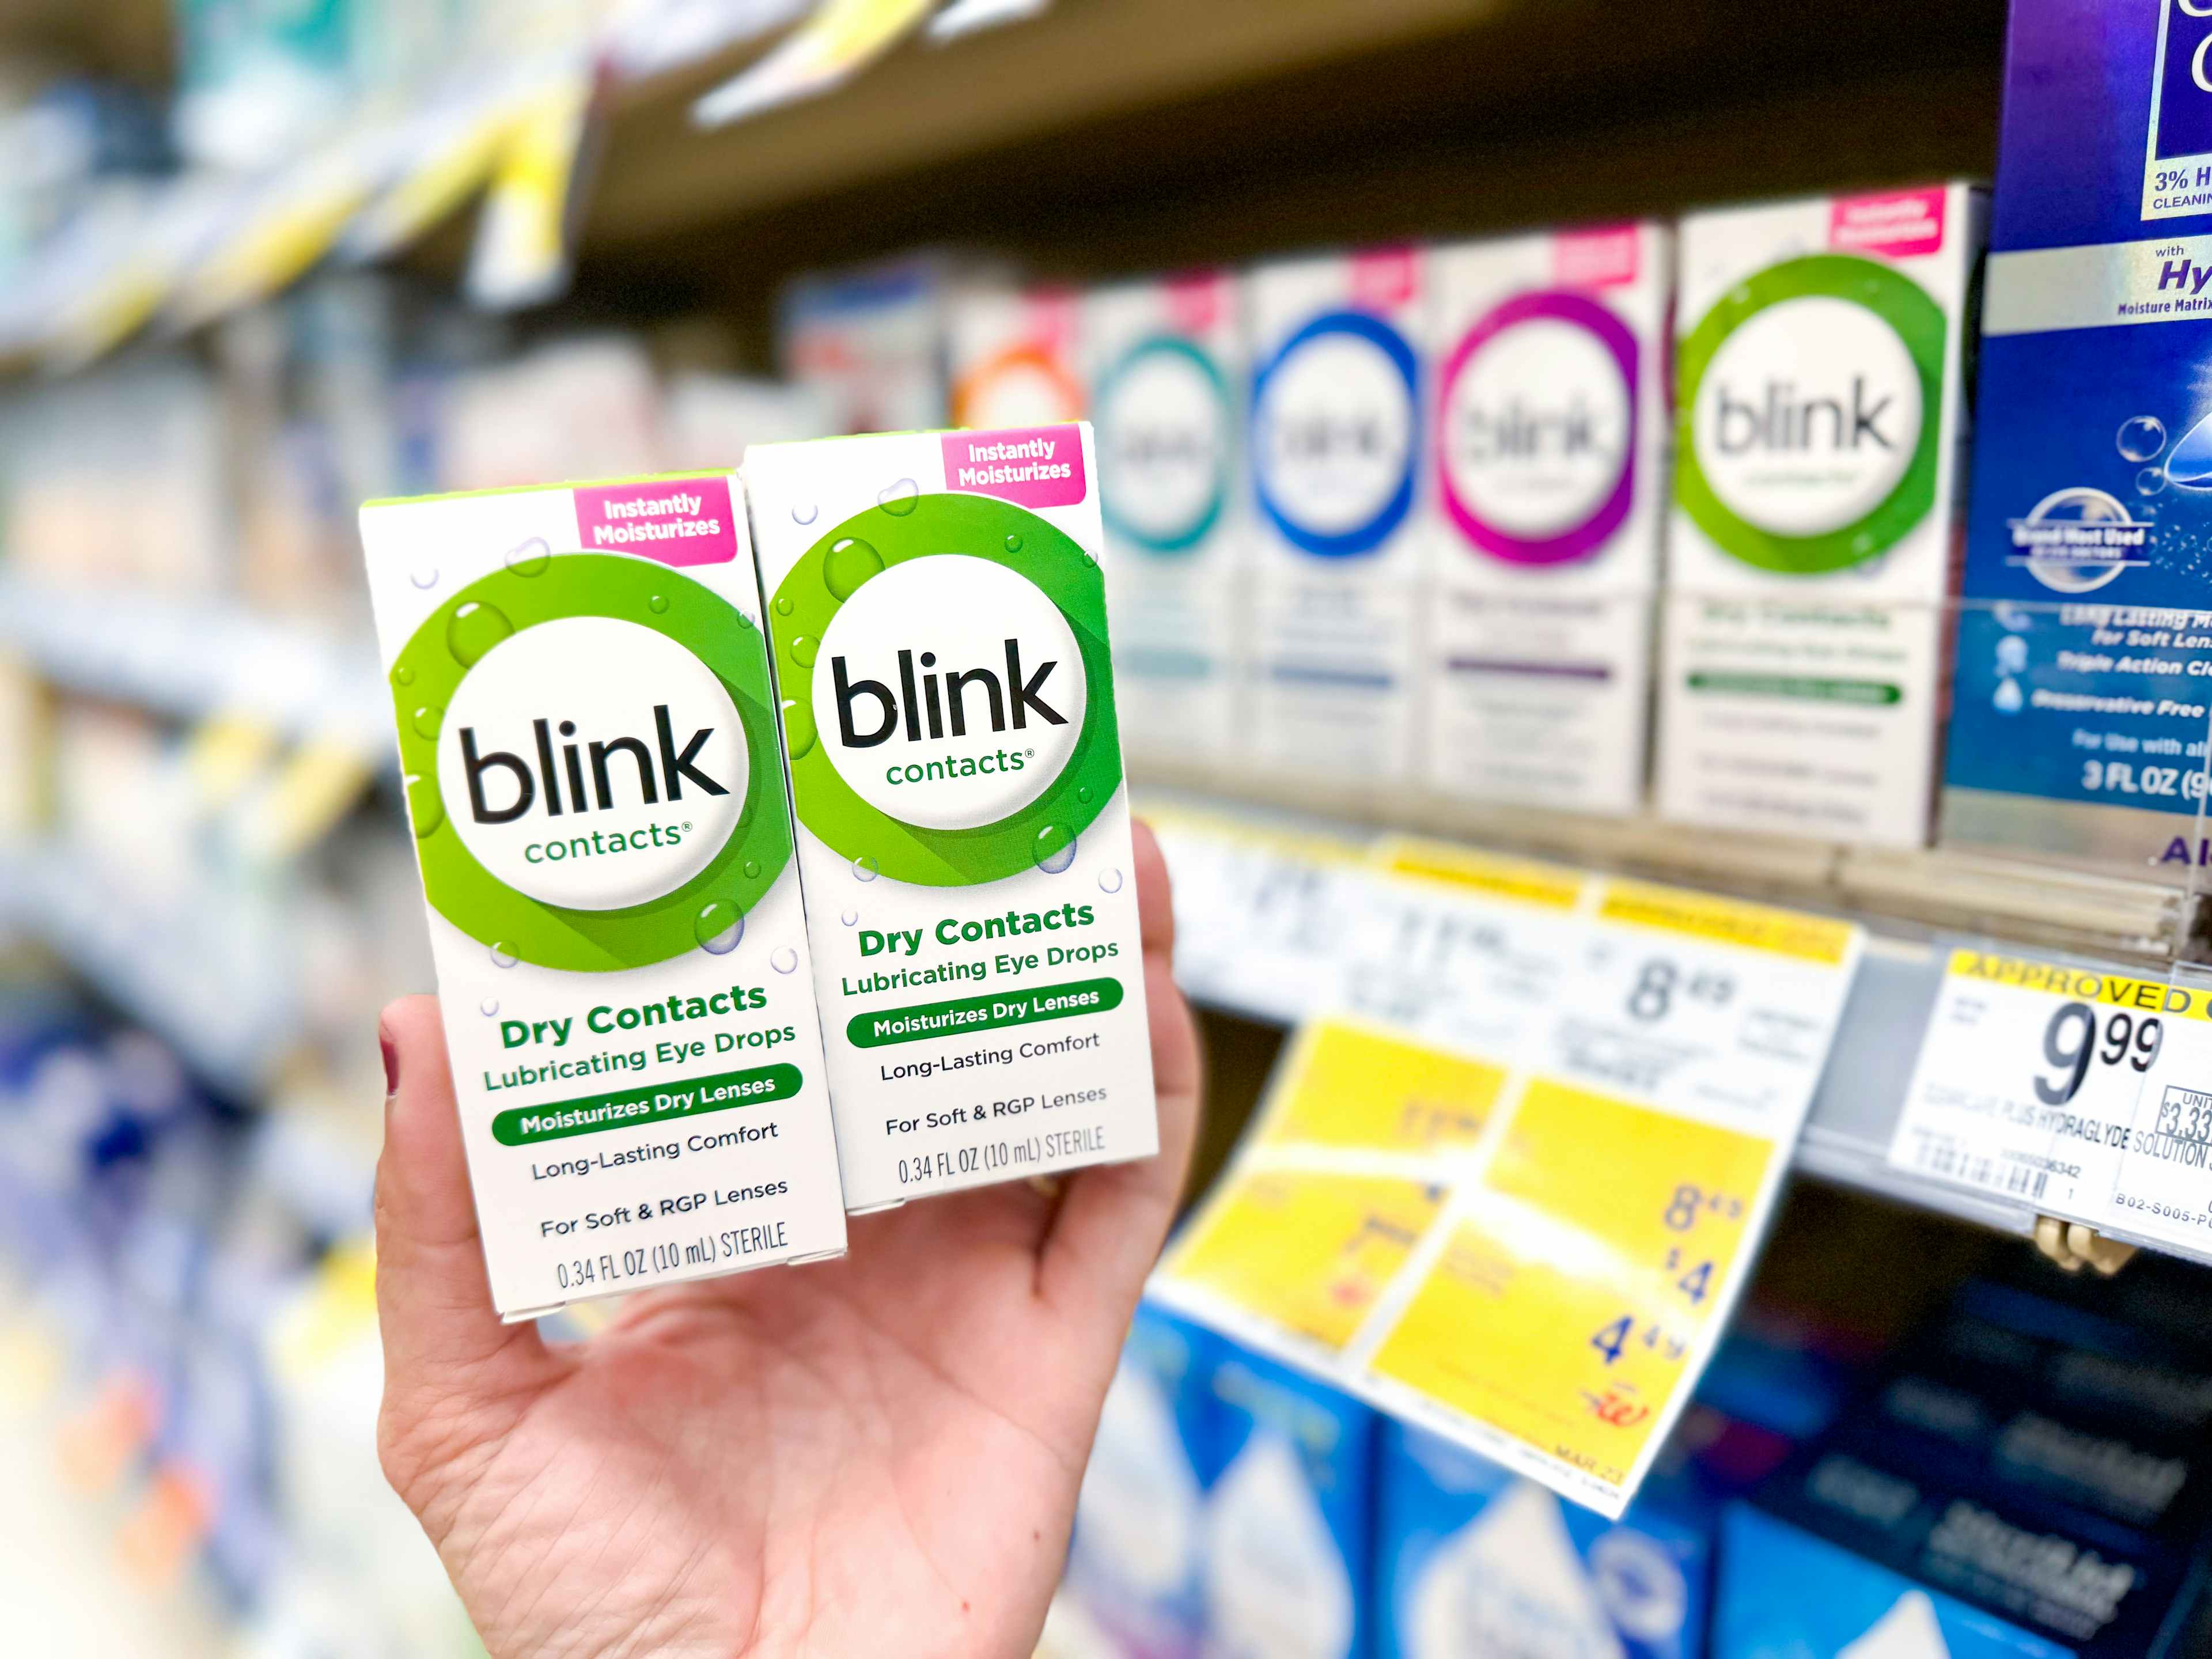 blink contact solution walgreens3